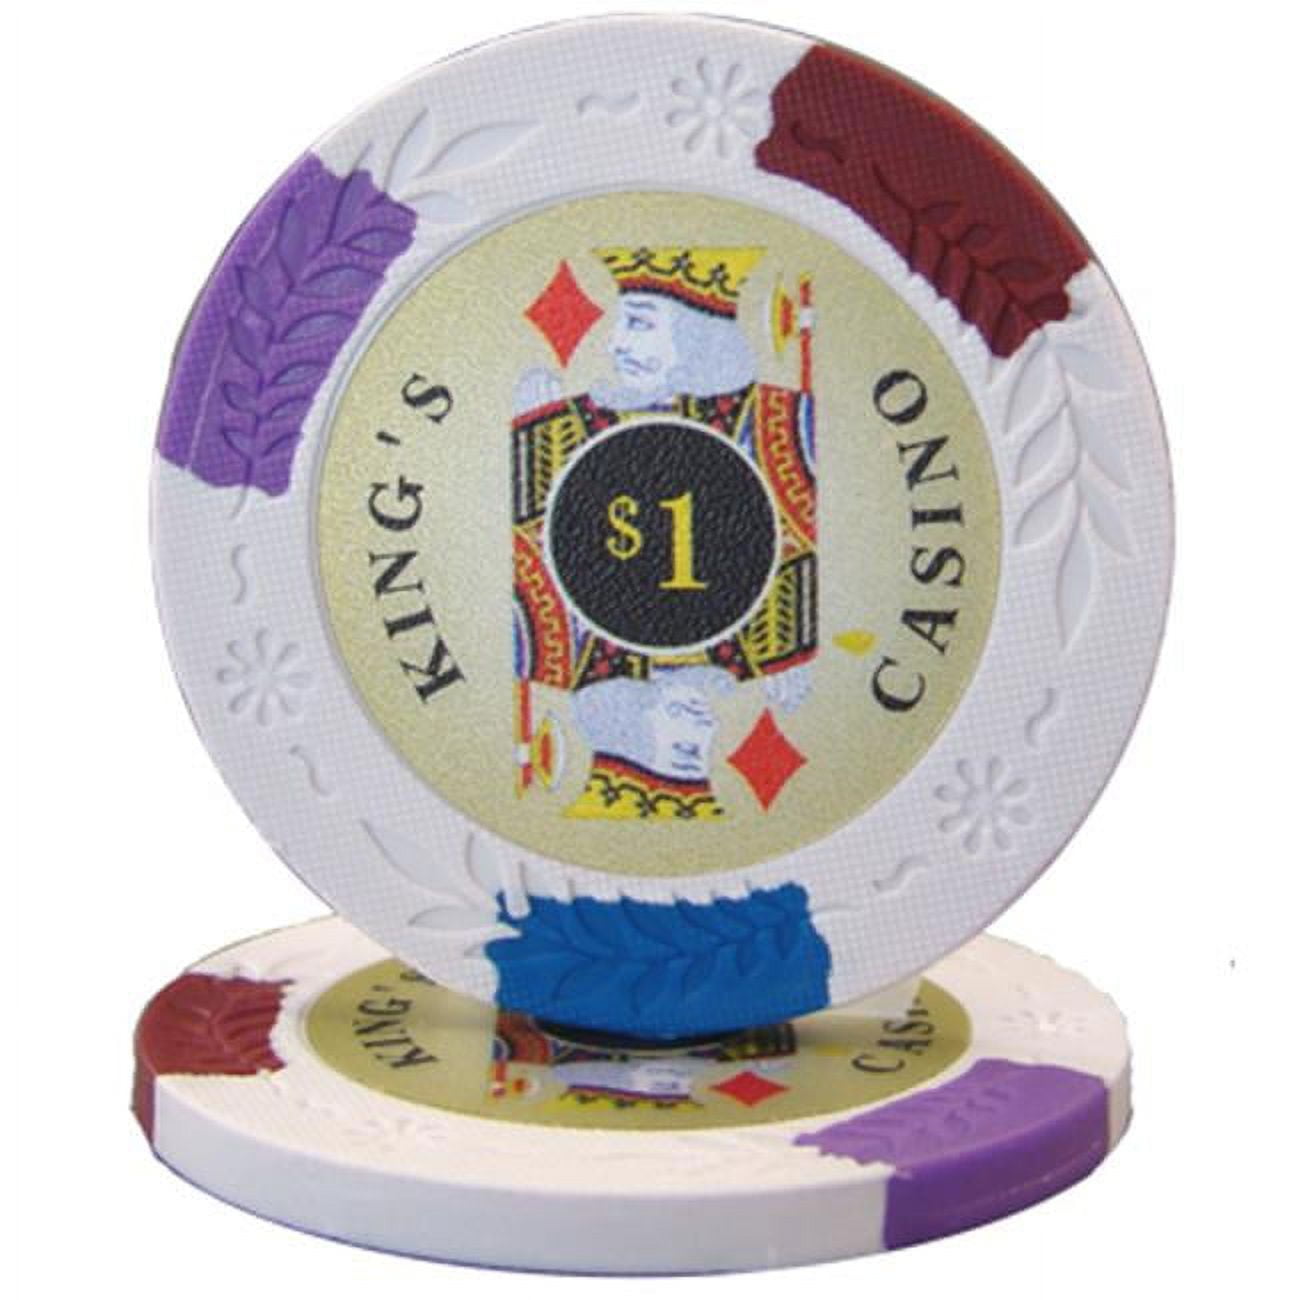 Cpkc-1-25 14 G Kings Casino Pro Clay - Dollar 1, Roll Of 25